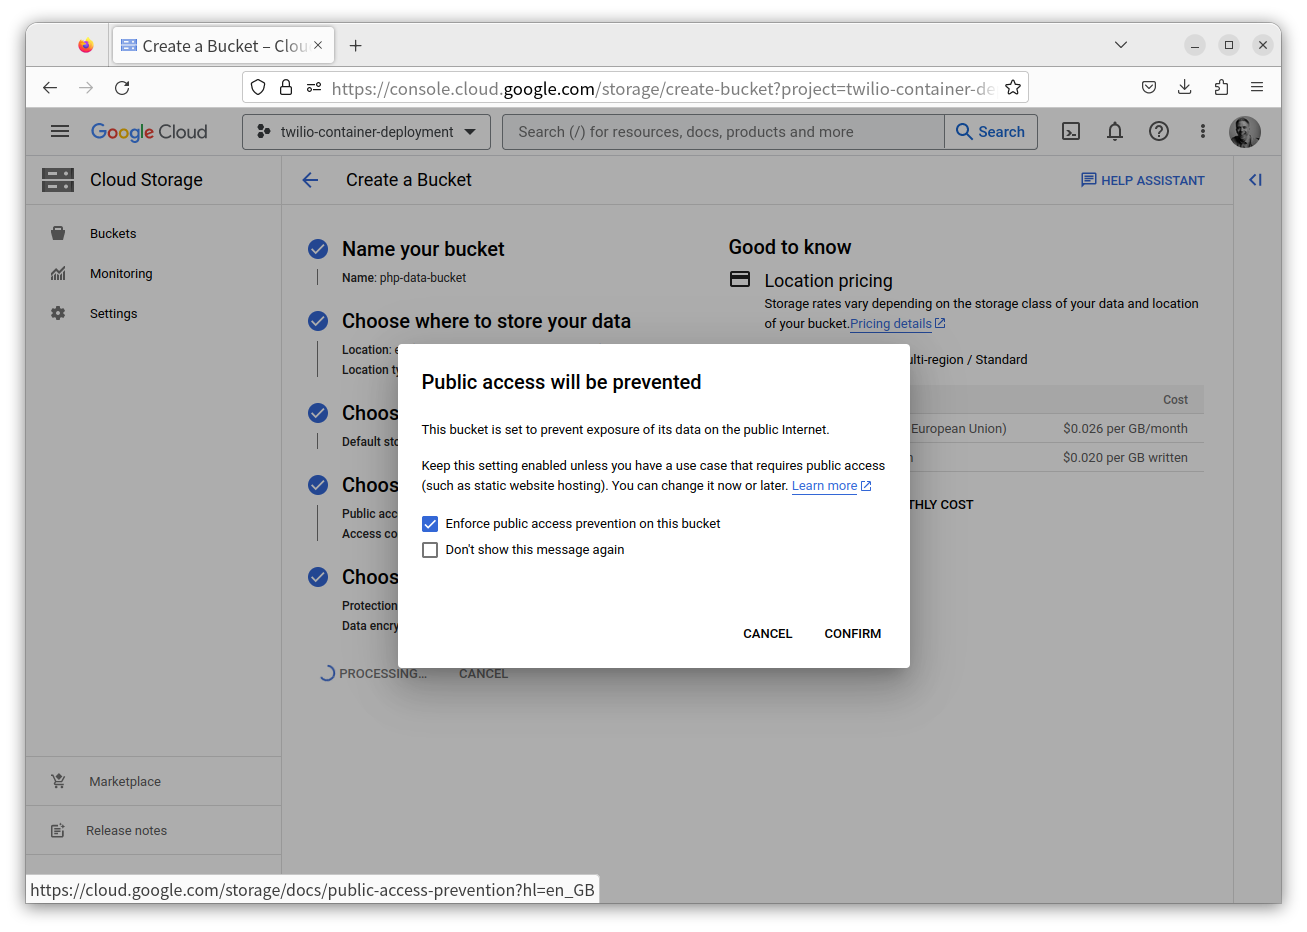 The final modal dialog when creating a bucket  in the Google Cloud Storage Console, showing that public access will continue to be prevented.